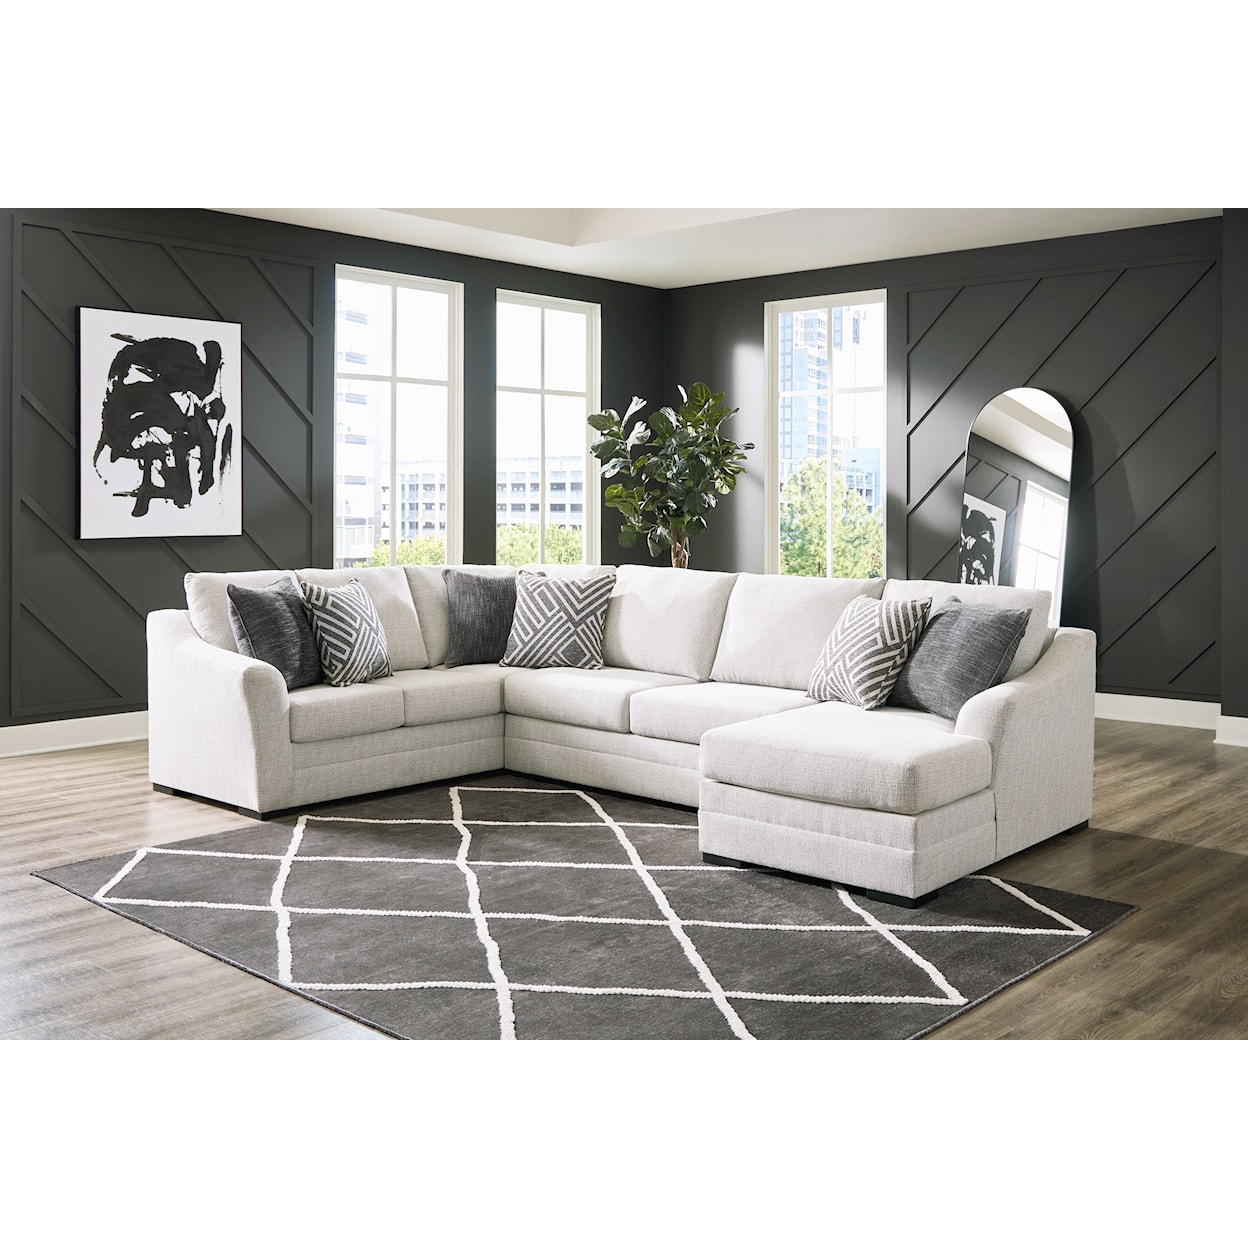 Benchcraft Kennedy 3-Piece Sectional With Chaise